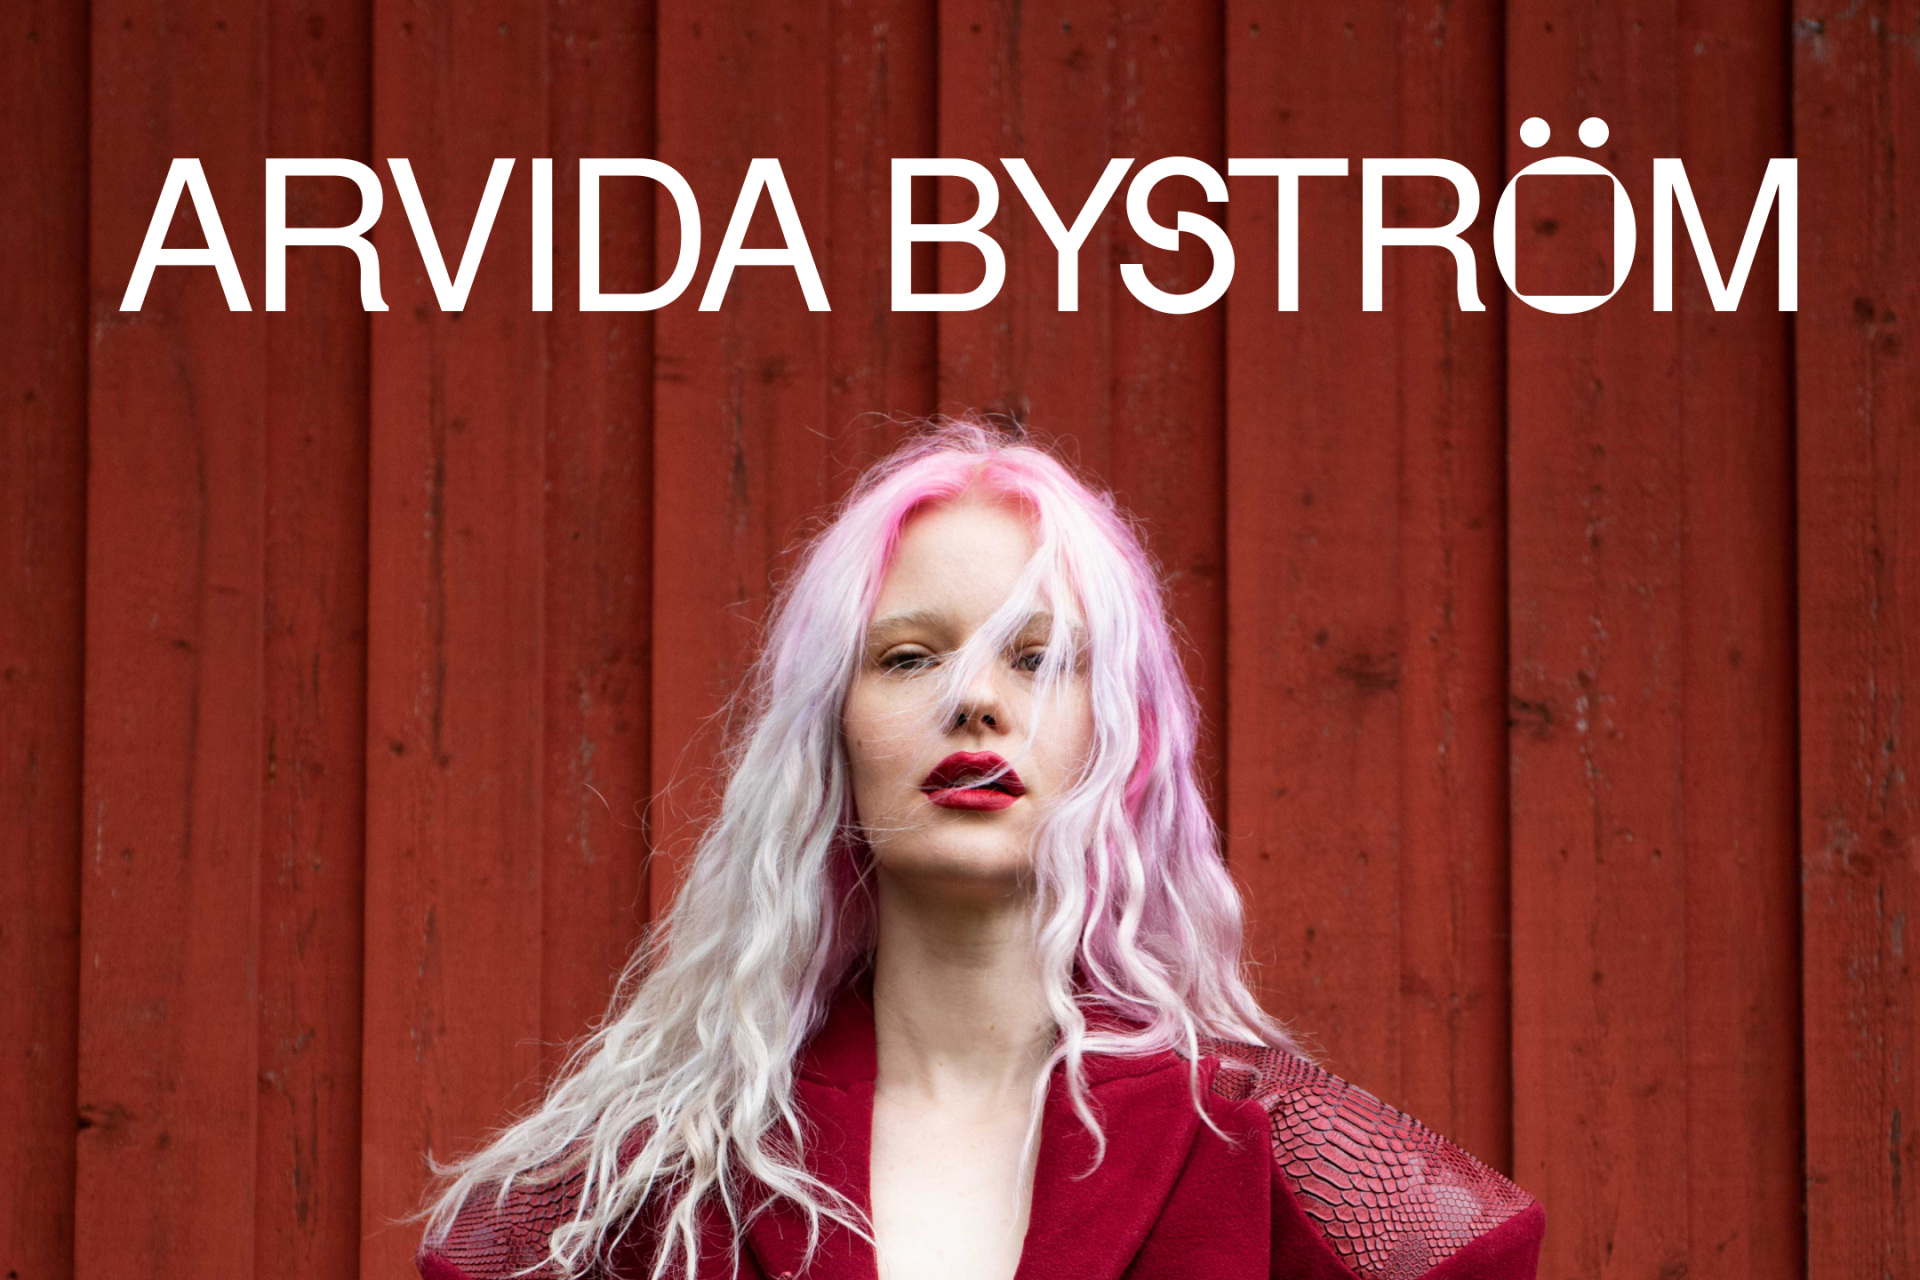 Arvida Byström on the myths we make to cope with reality.